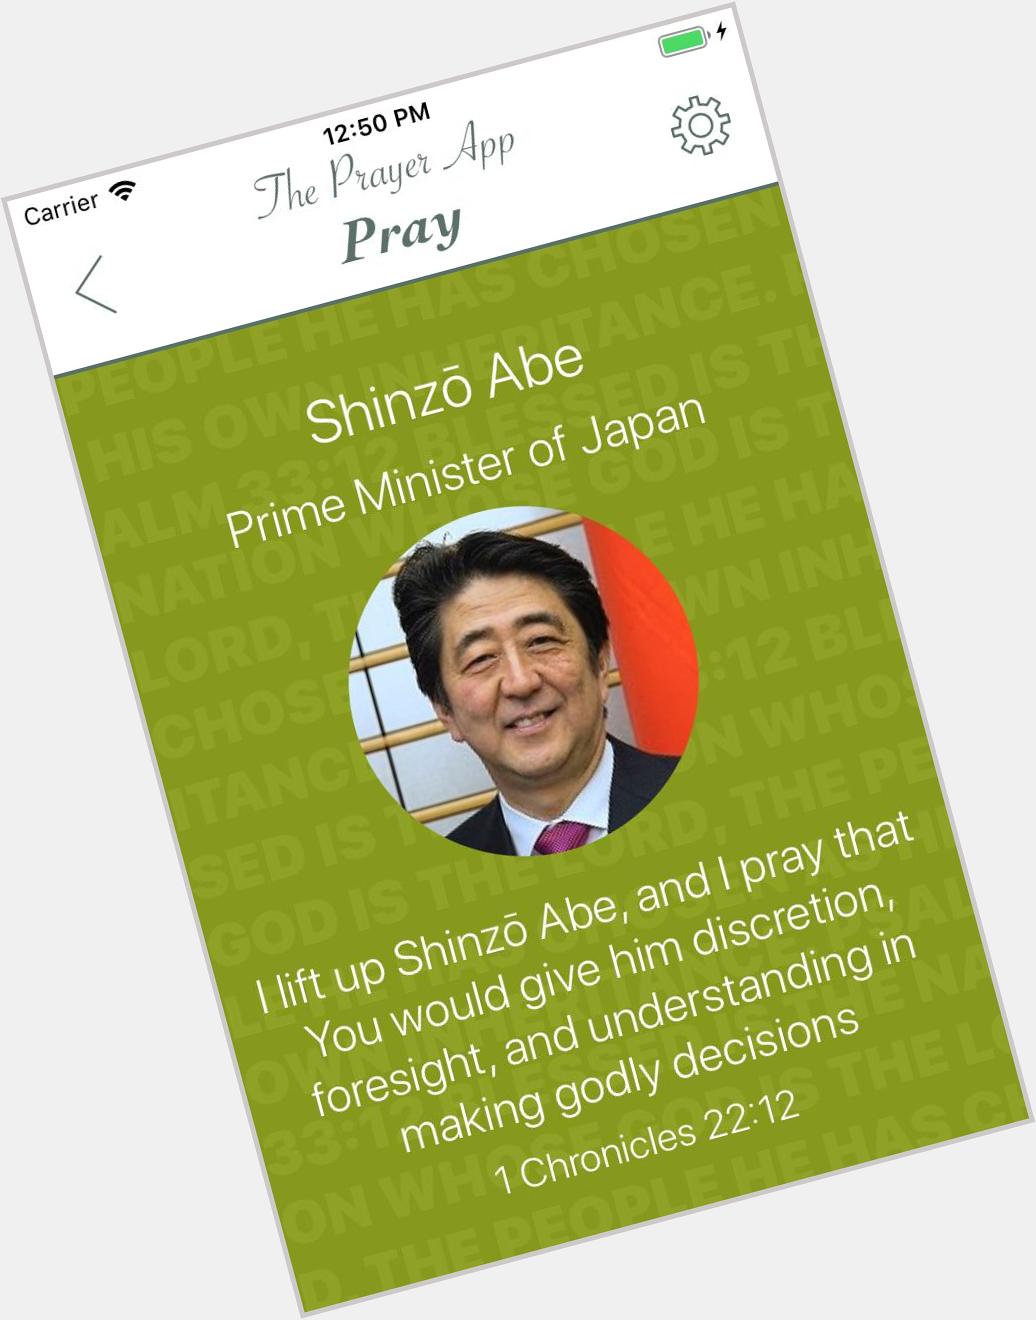 Happy birthday, Shinzo Abe! We\re praying for you and your family today! 